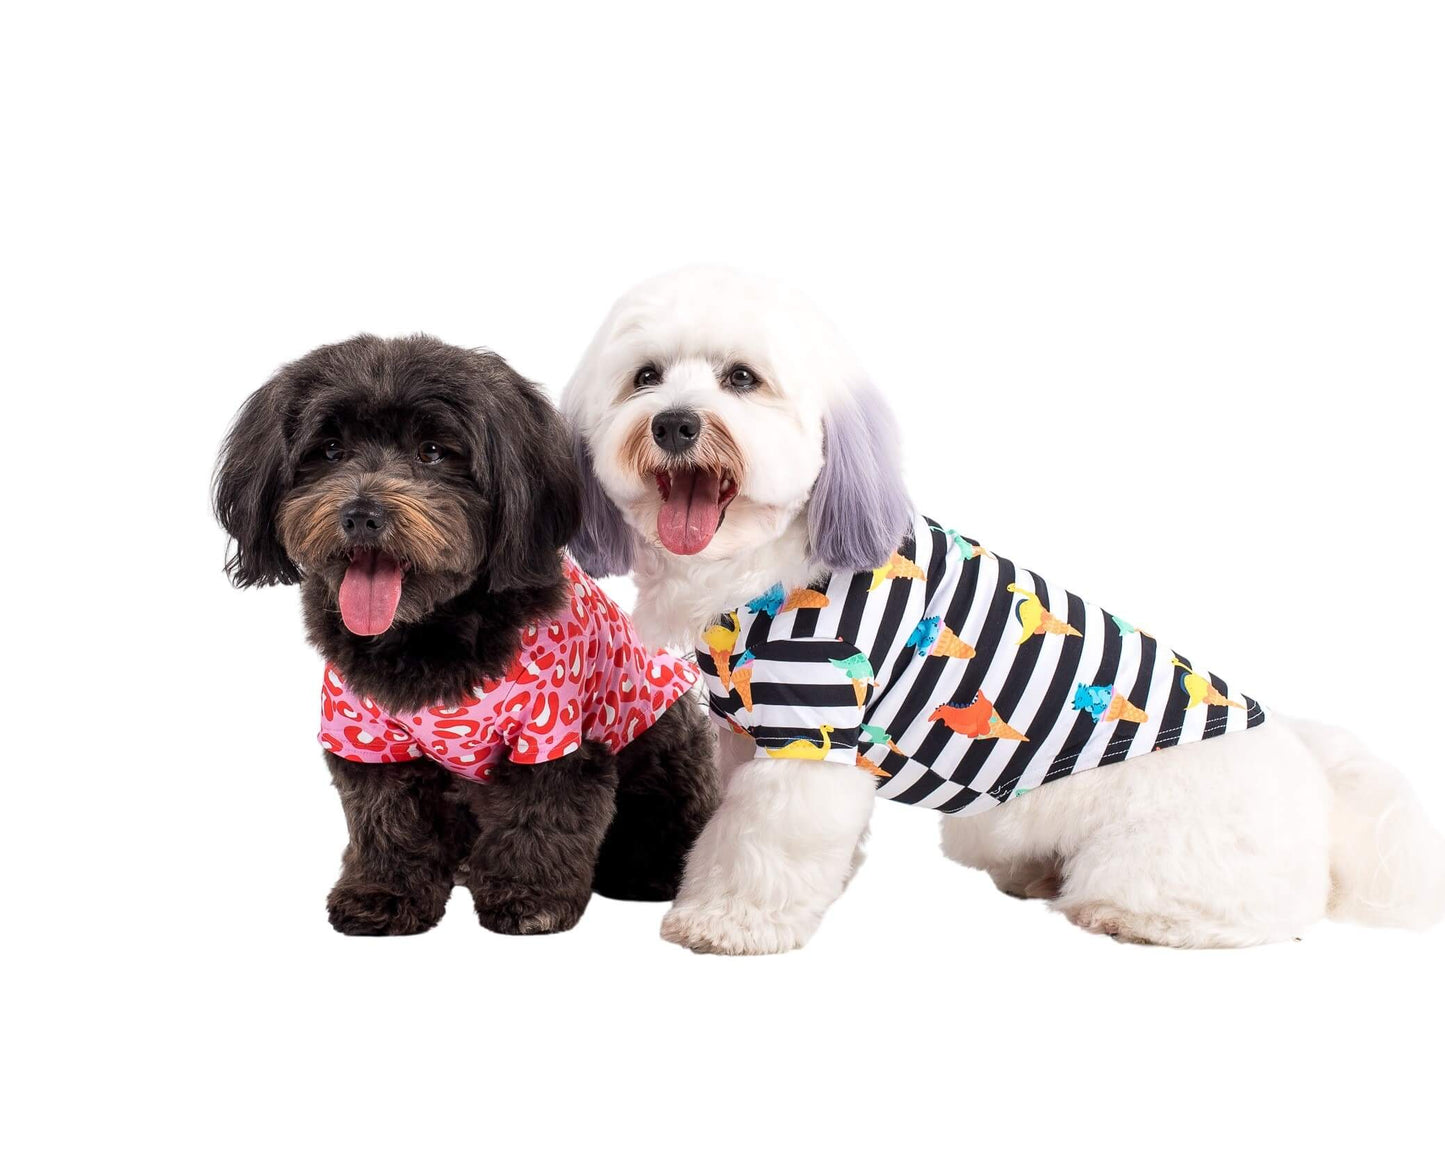 Two cavoodles wearing a dinomite dog shirt made by Vibrant Hound.